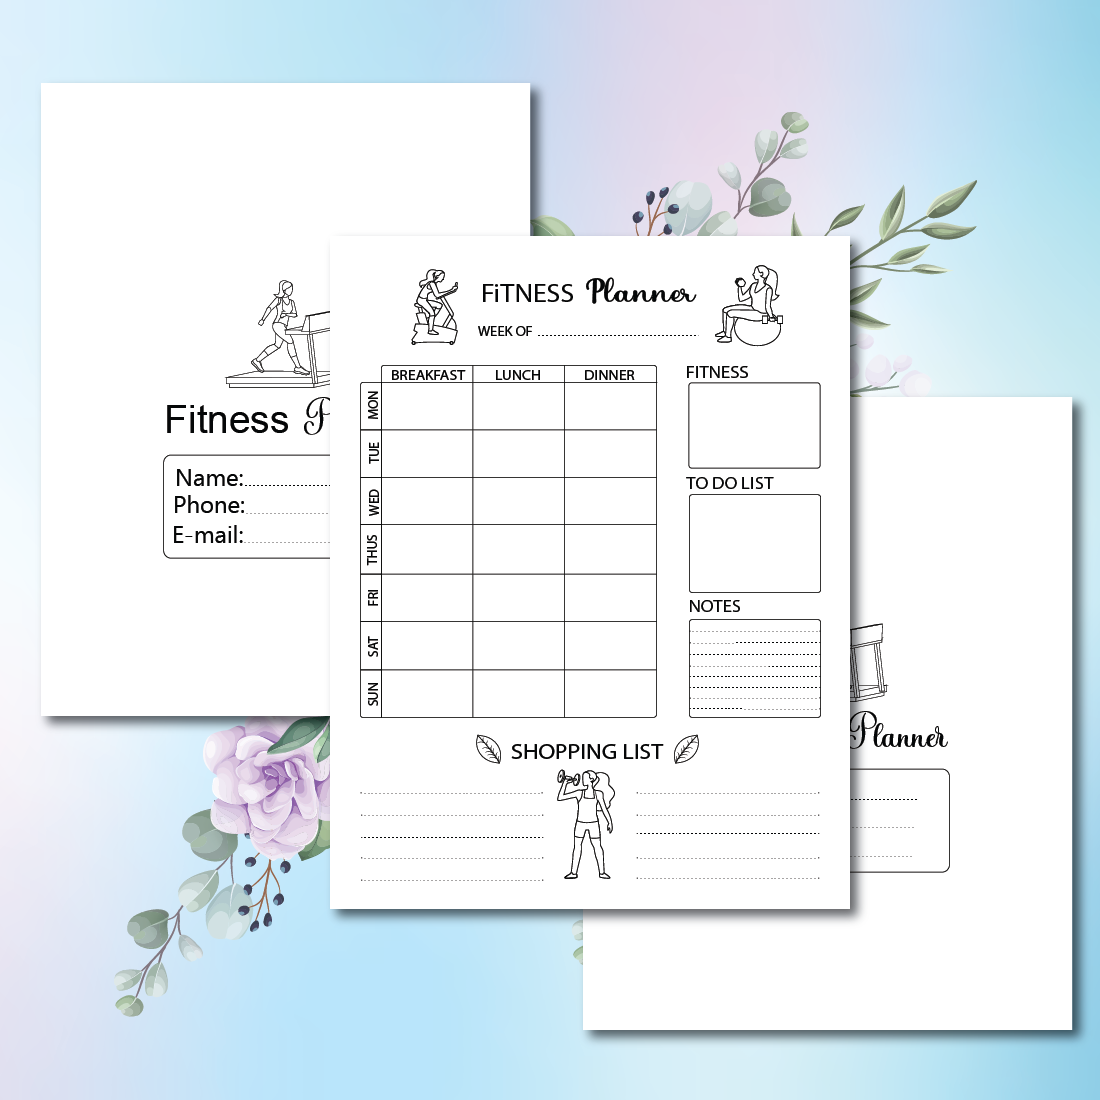 Clean Fitness Planner KDP Interior cover image.